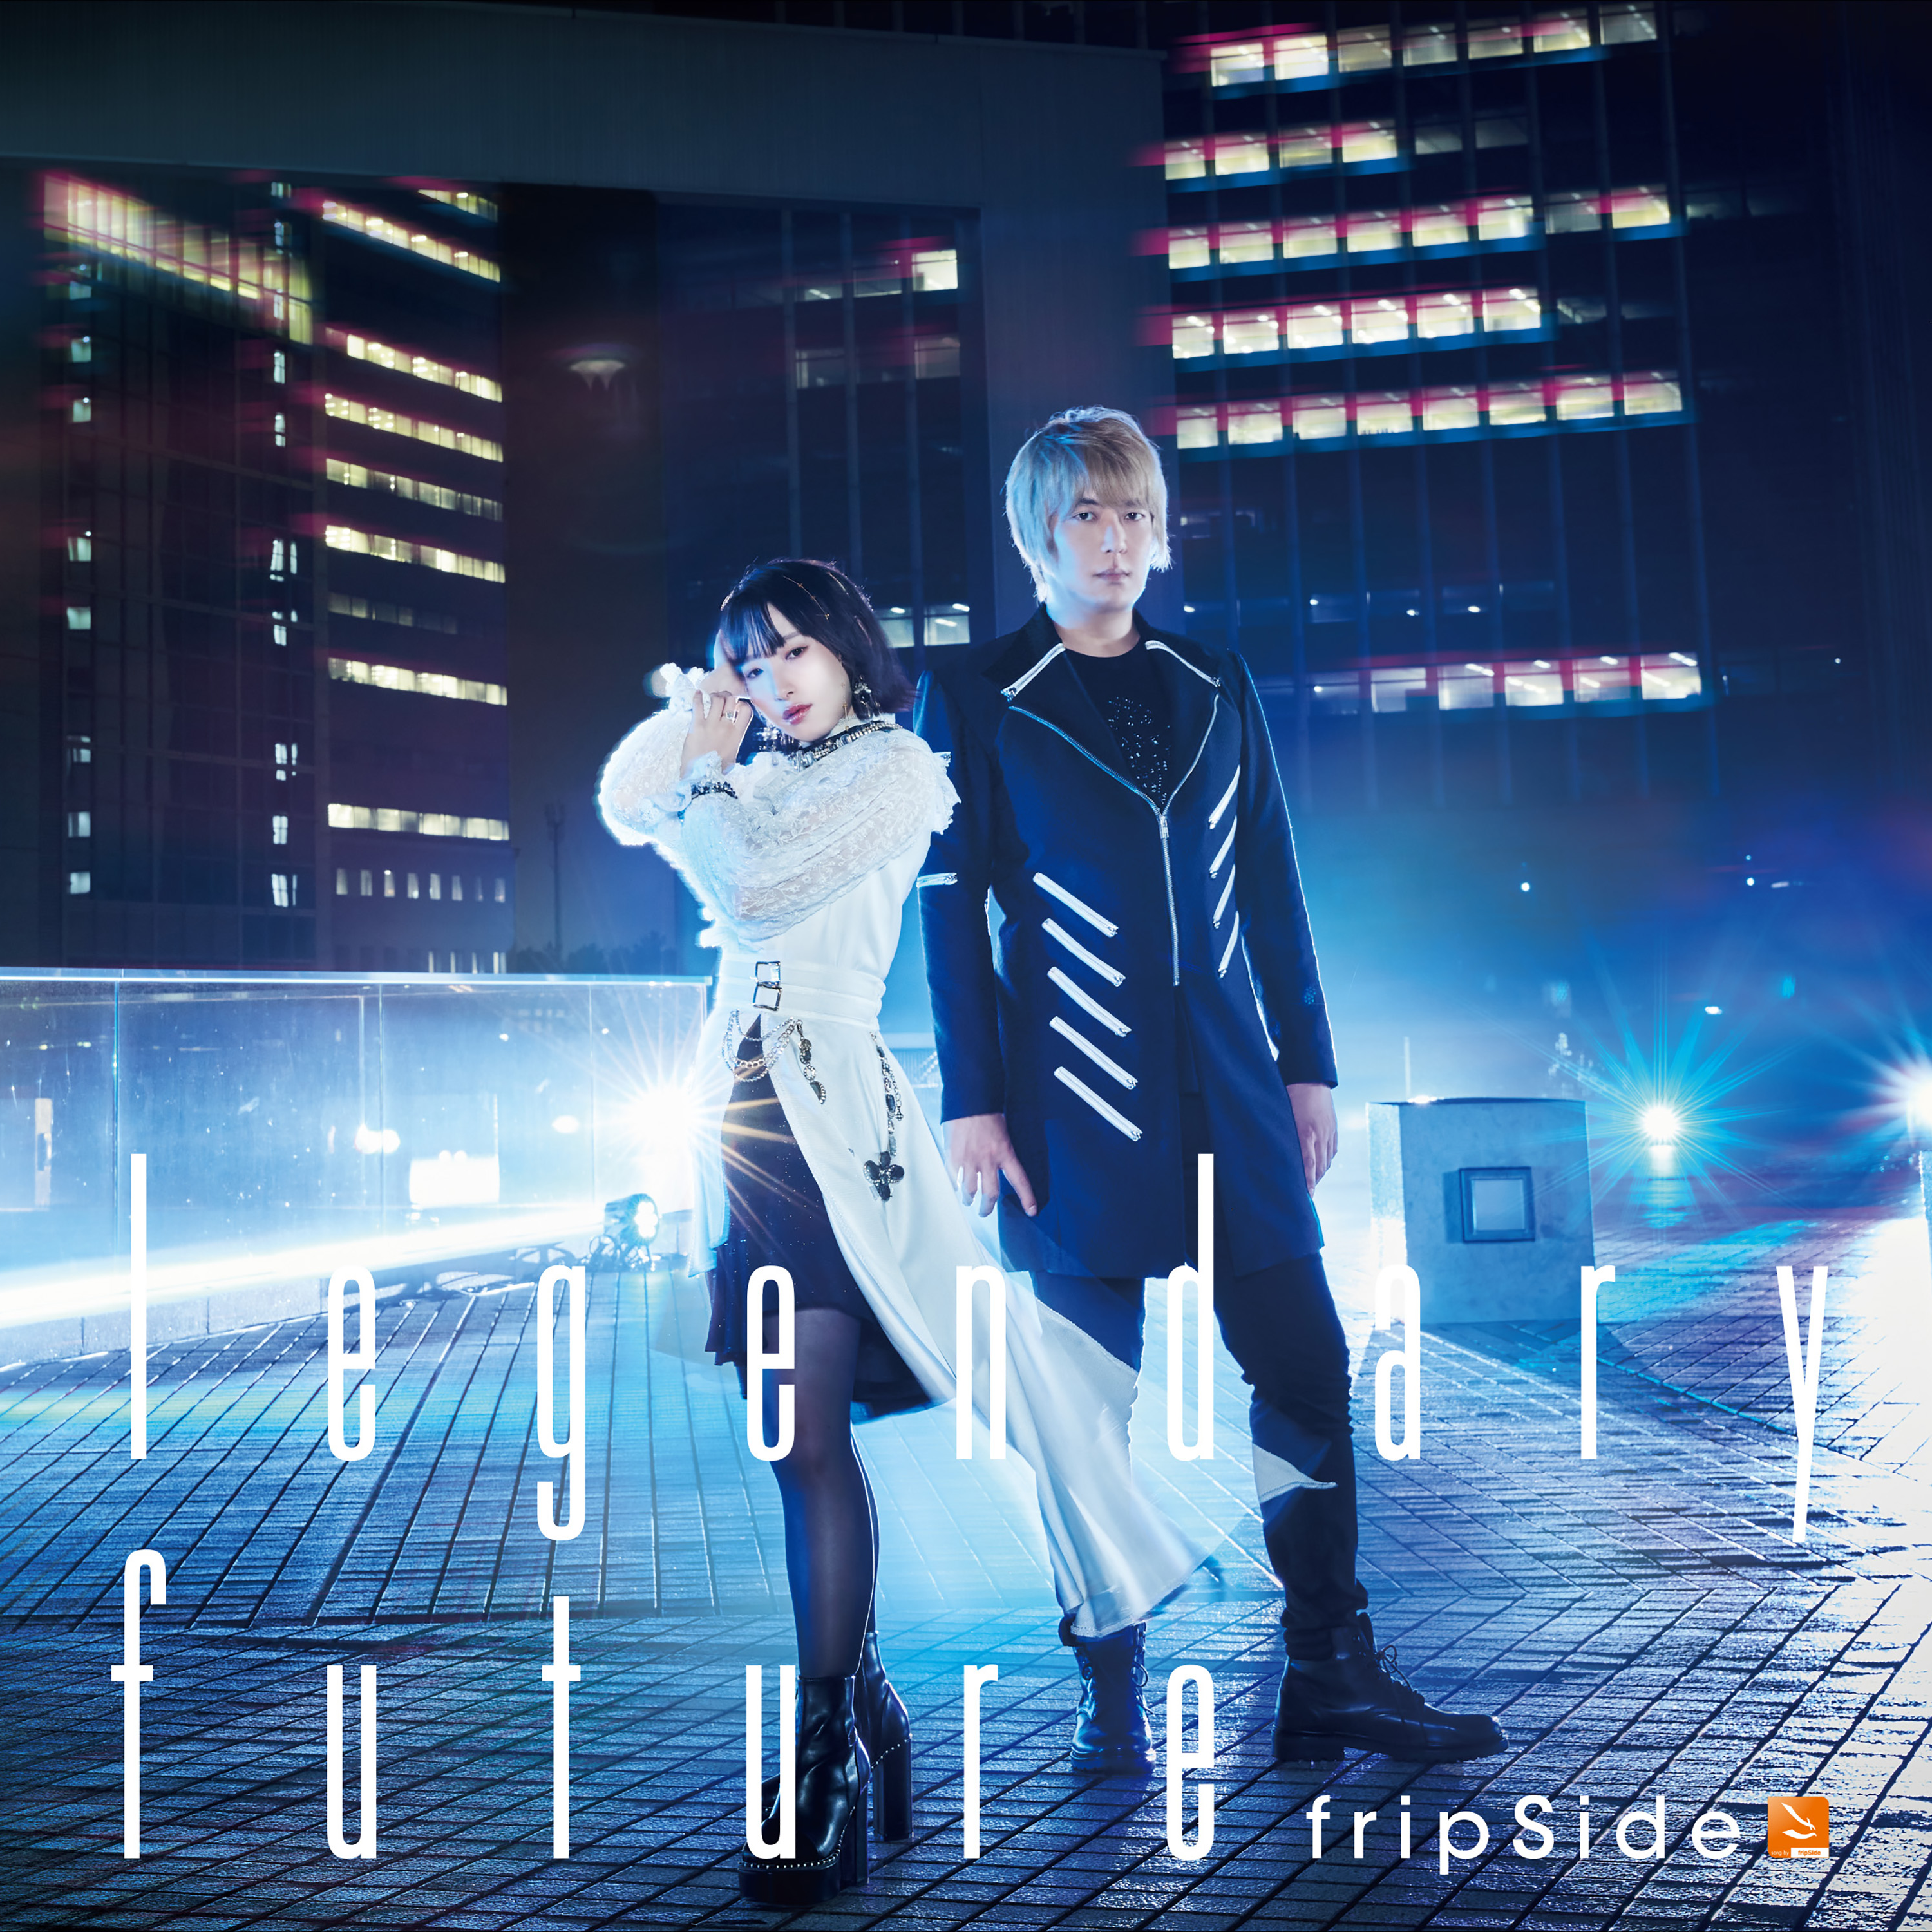 a new day will come歌词 歌手fripSide-专辑legendary future-单曲《a new day will come》LRC歌词下载